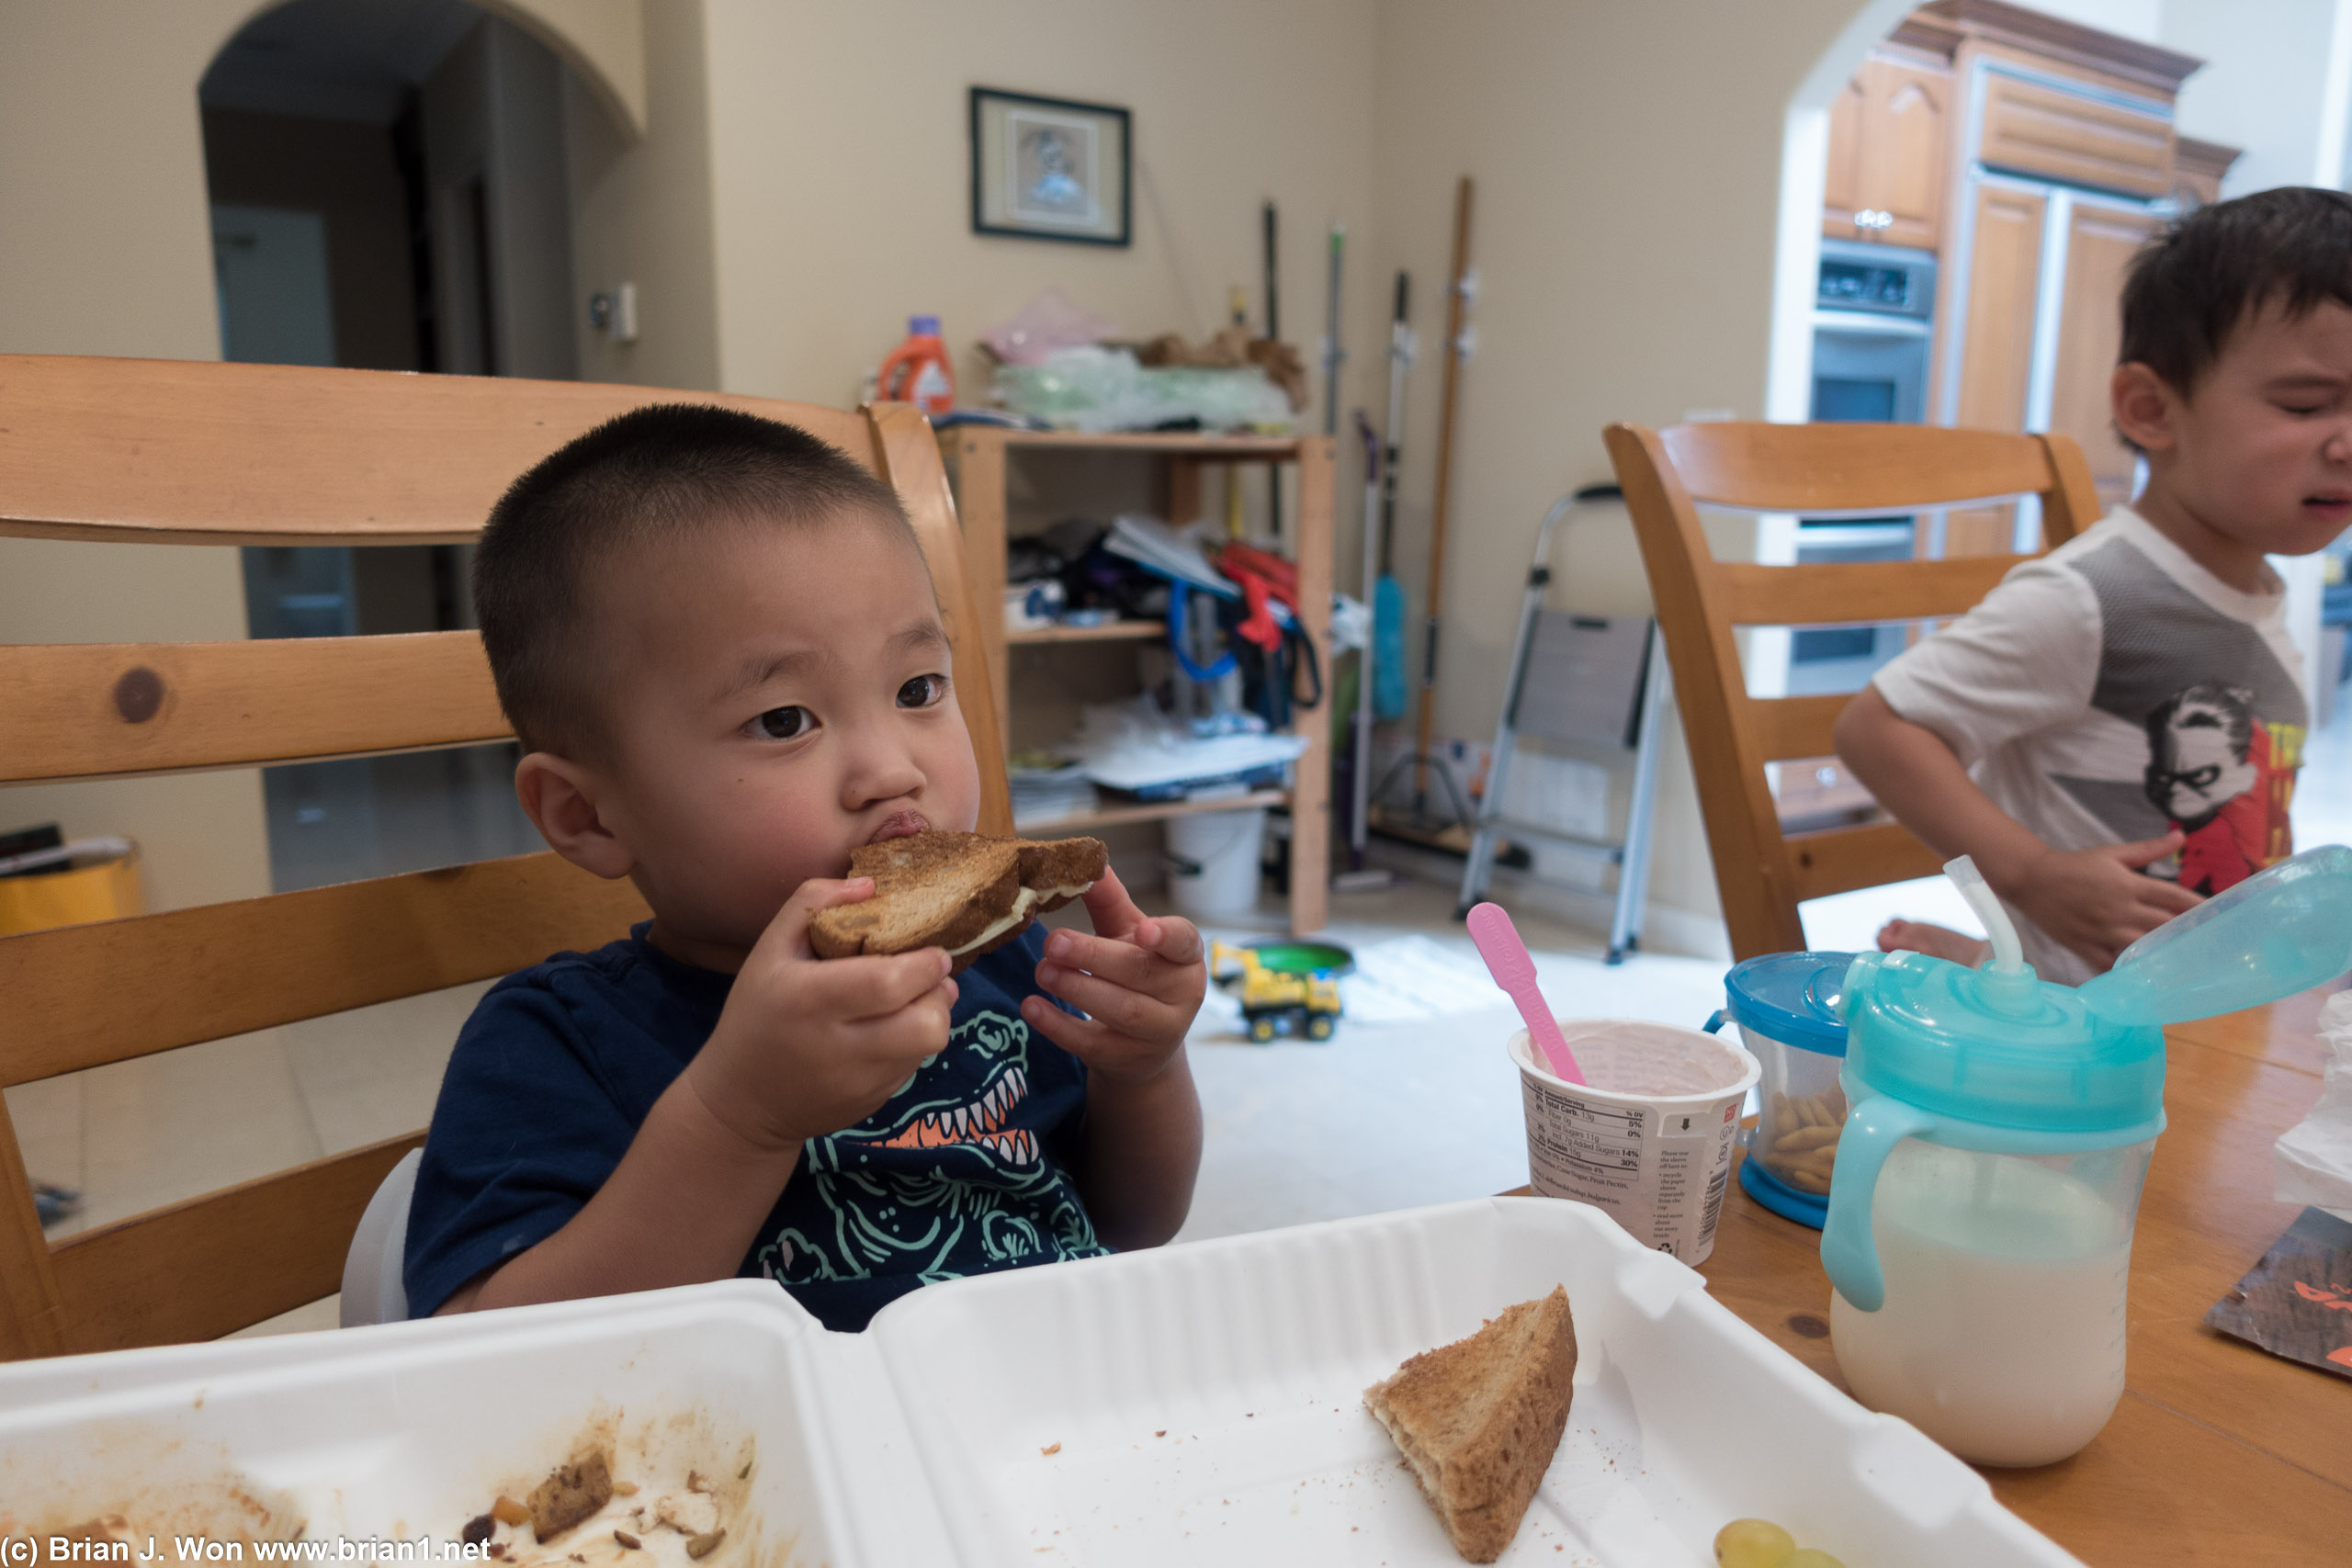 Lucas nom's away on his grilled cheese.